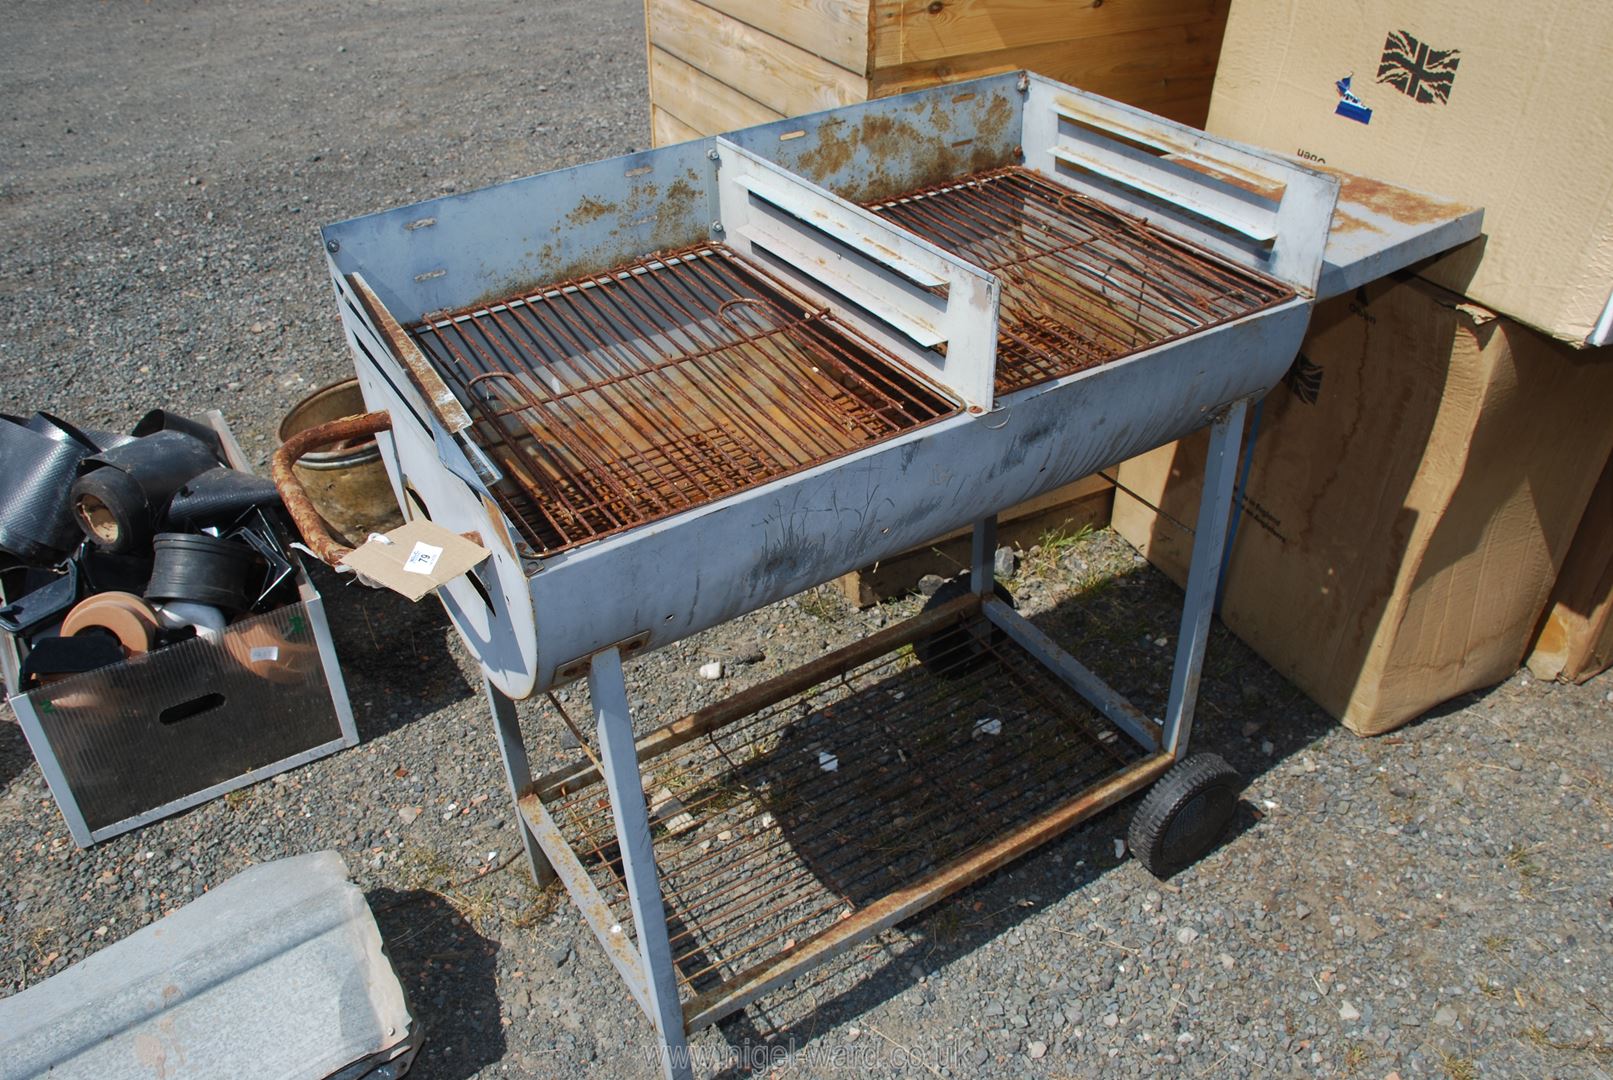 A large barbecue on wheels with double grill.